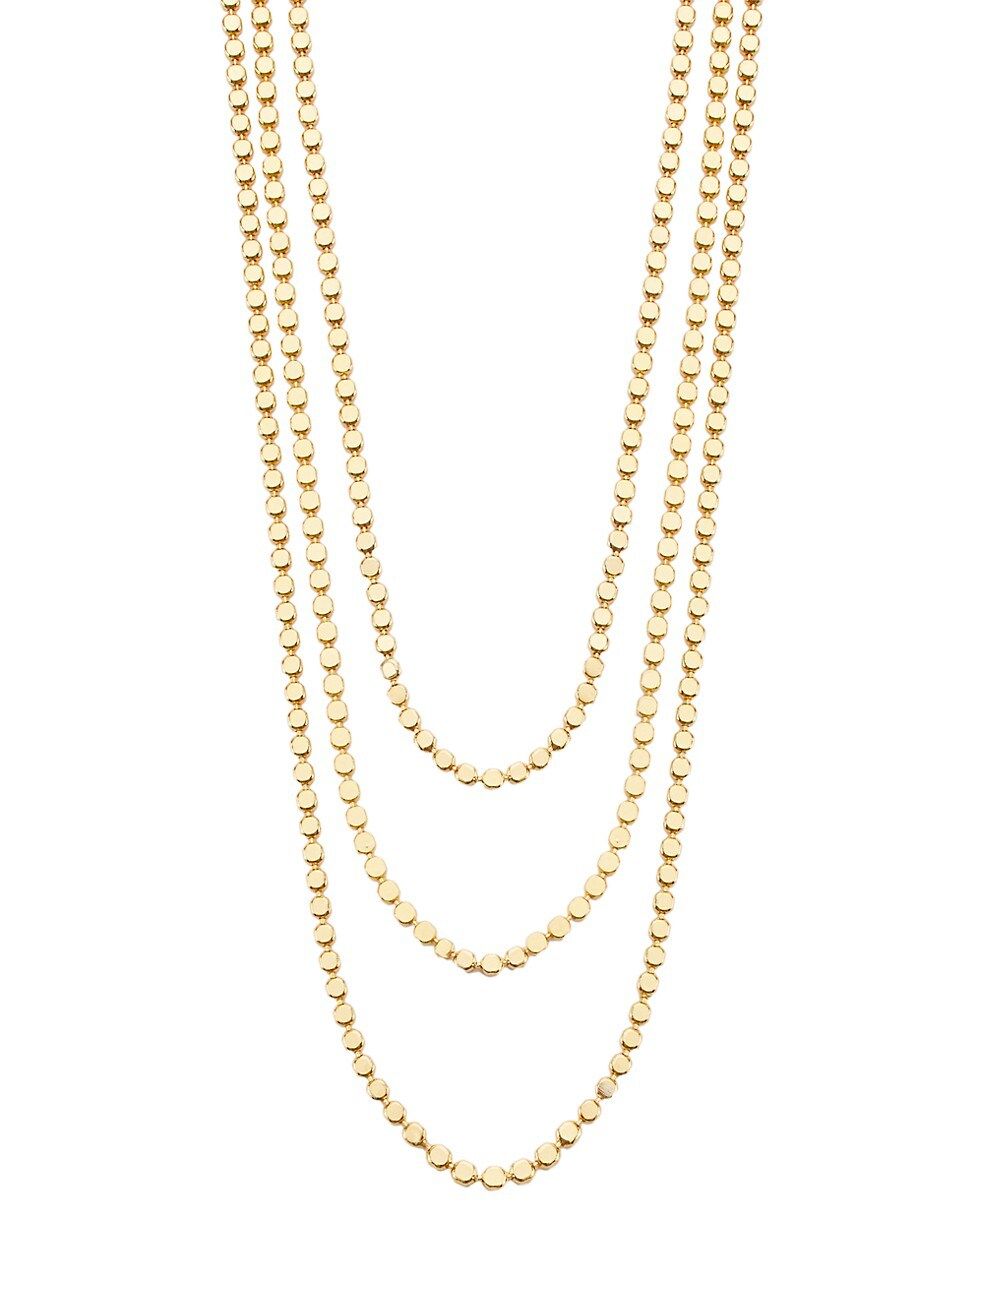 Jordan Road Jewelry In The Vineyard Chateau 18K Gold-Plated Necklace | Saks Fifth Avenue